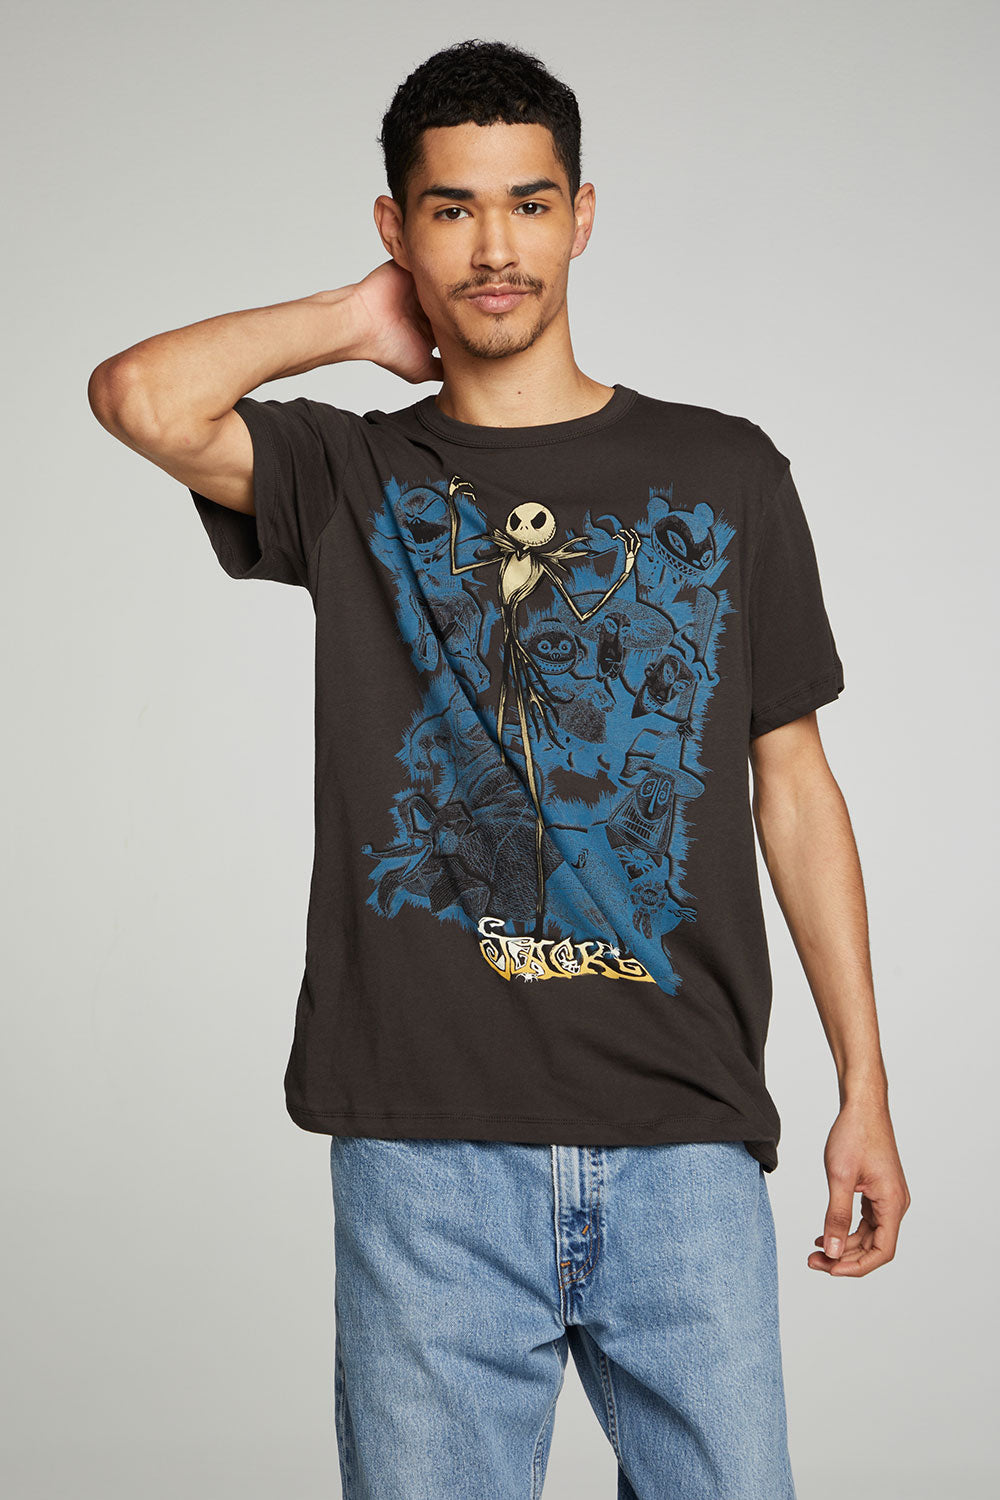 The Nightmare Before Christmas - Jack MENS chaserbrand